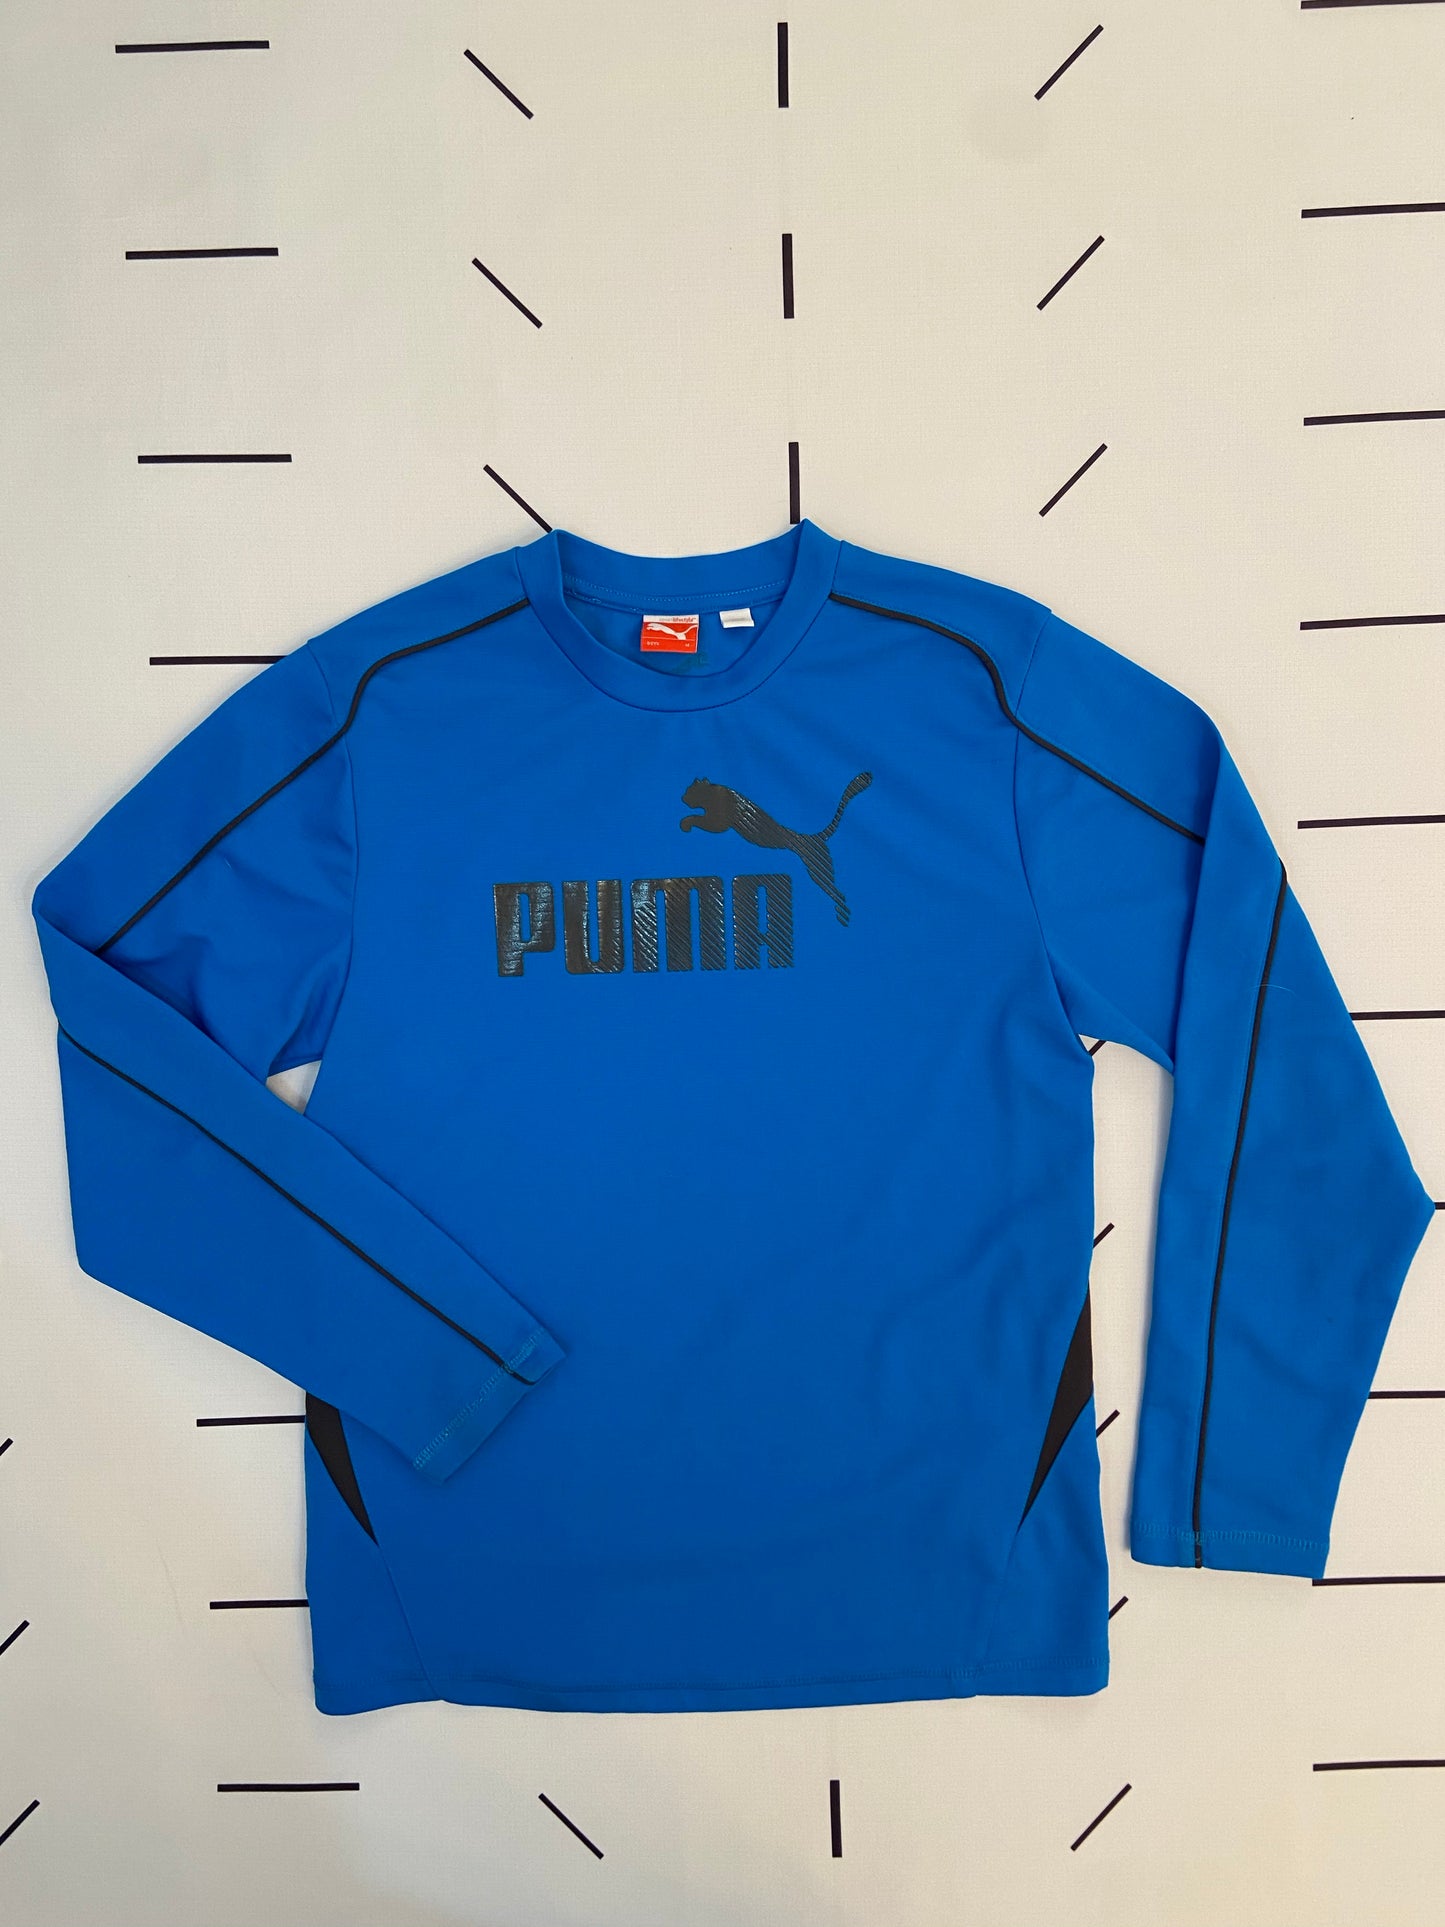 Puma Dry Cell Blue Long Sleeve- Youth M